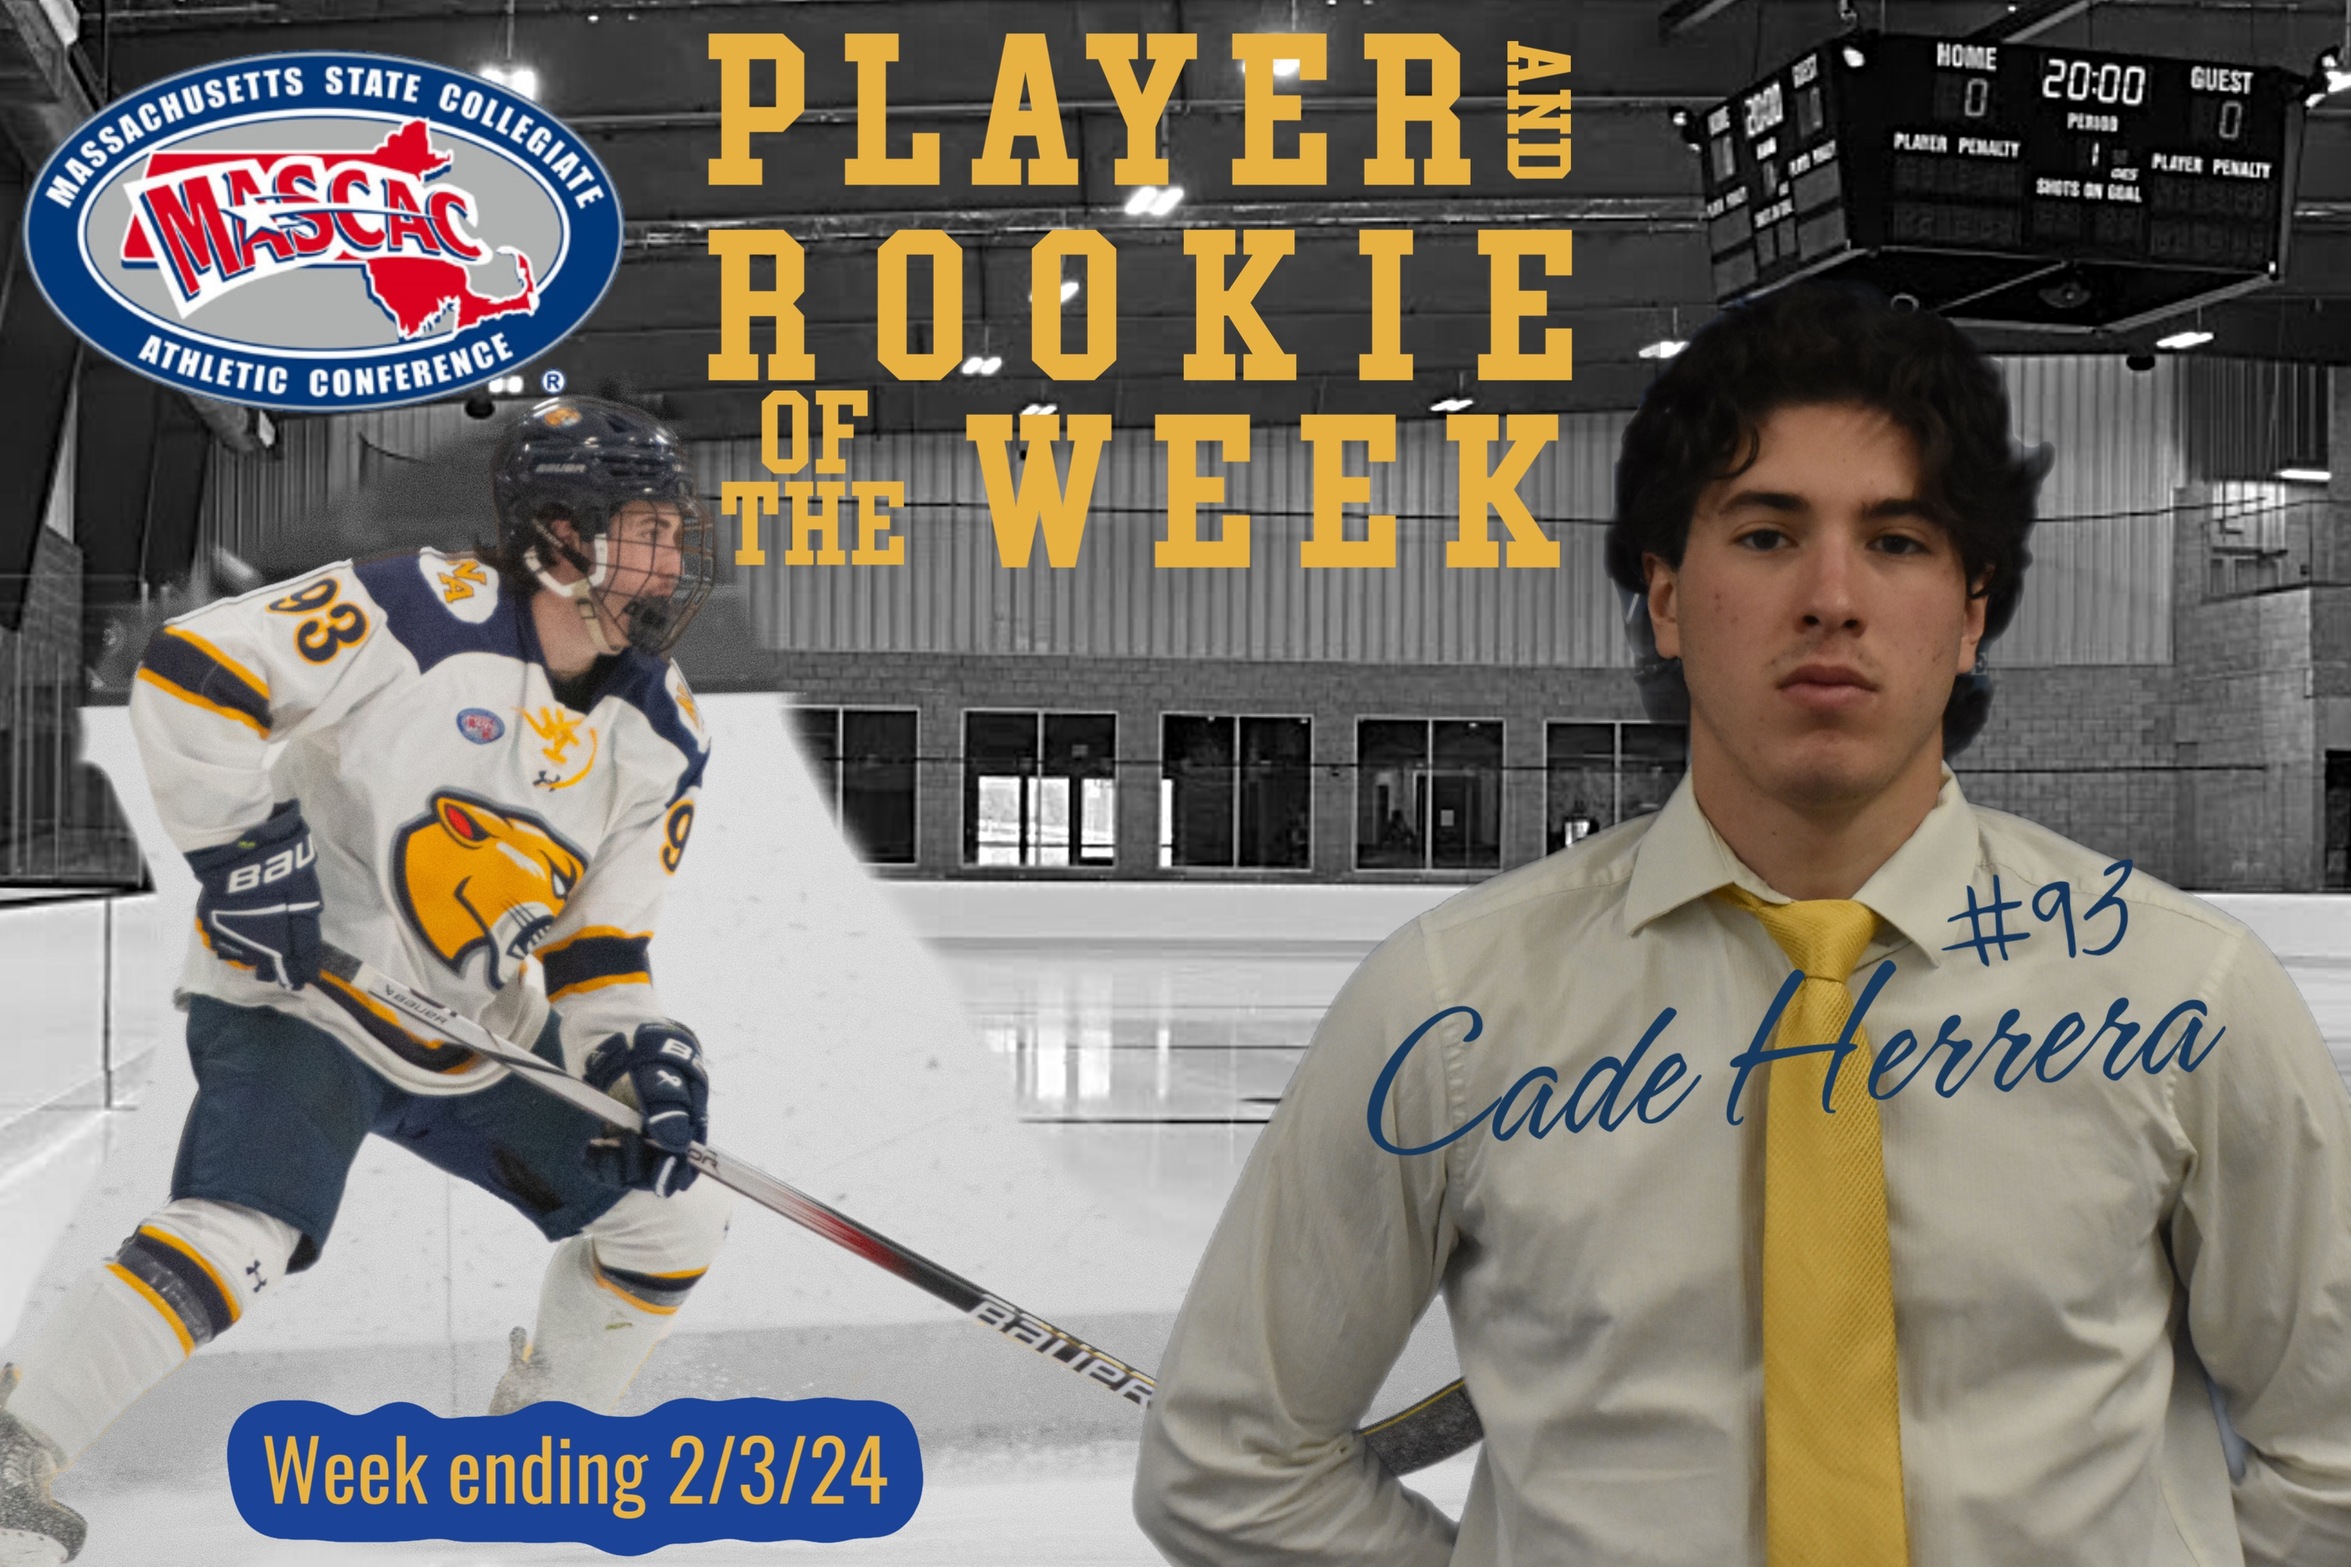 Herrera earns MASCAC Player and Rookie of the Week